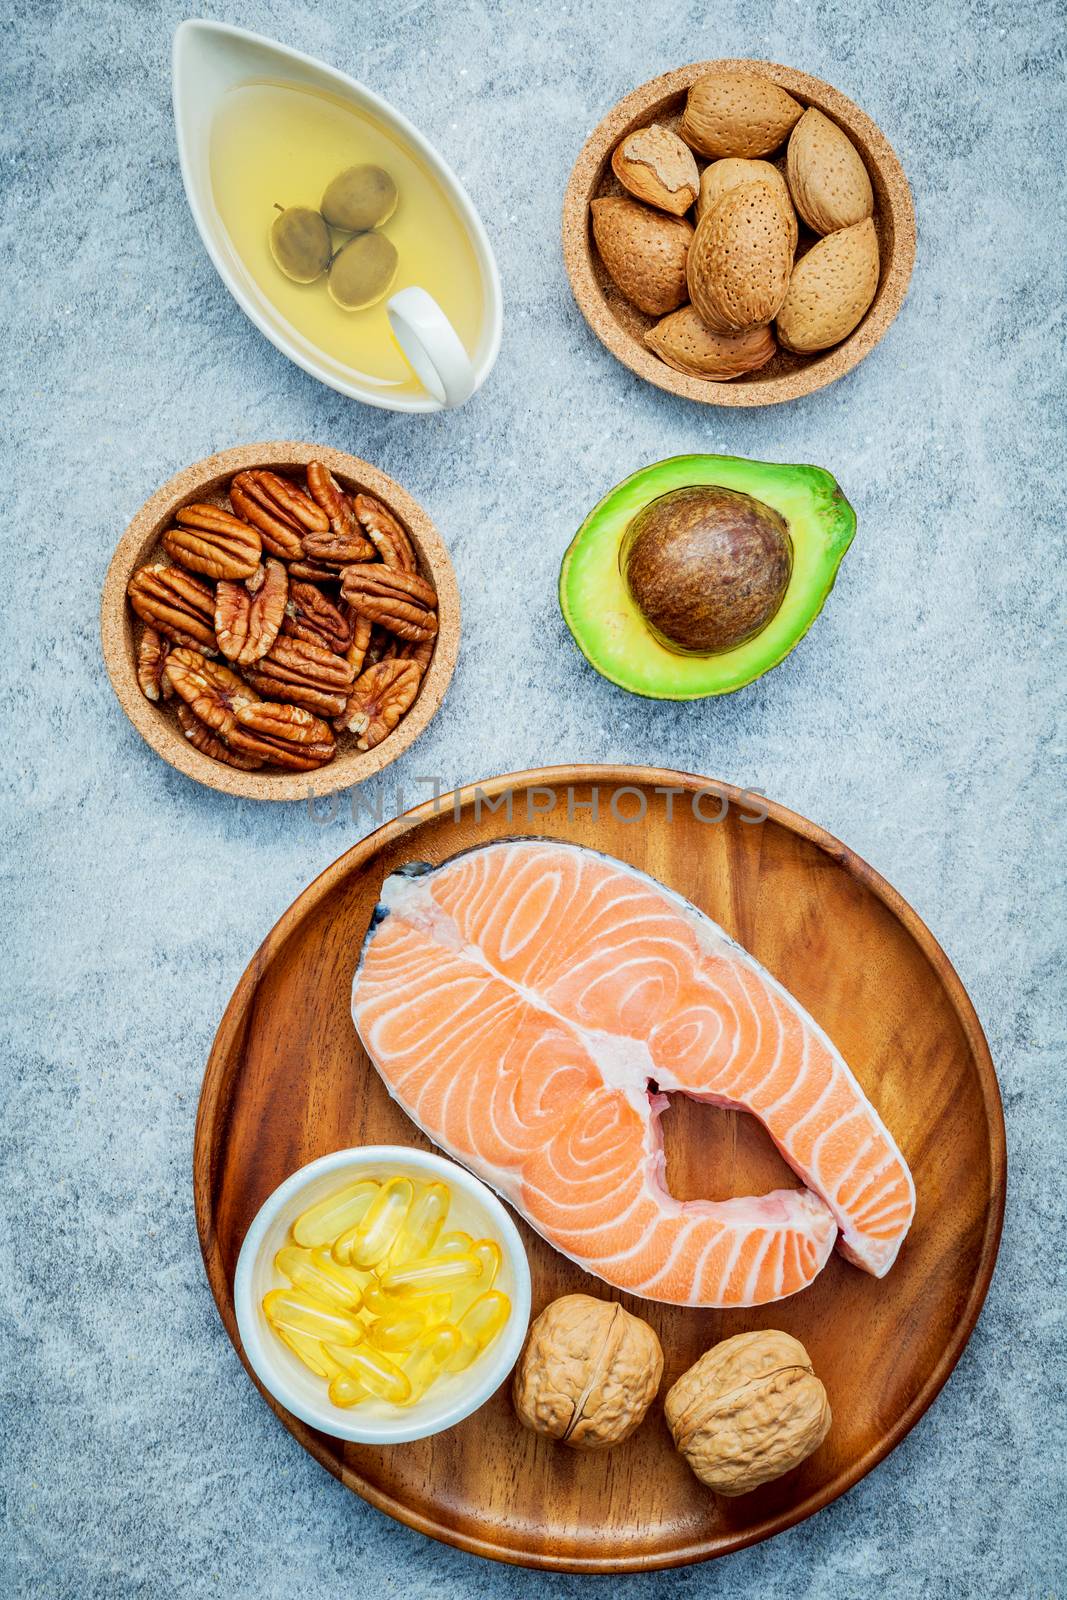 Selection food sources of omega 3 and unsaturated fats. Super fo by kerdkanno